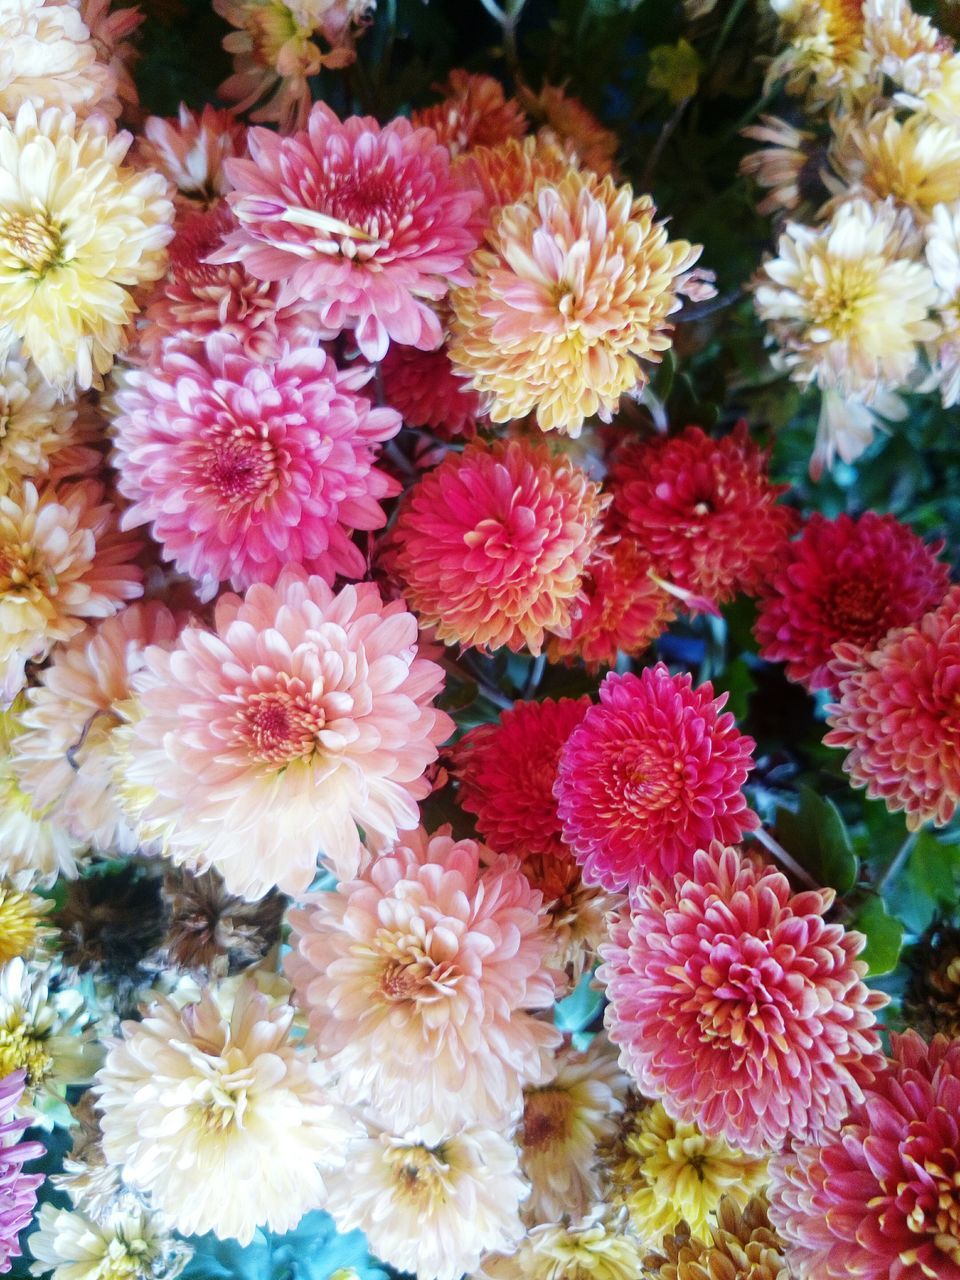 HIGH ANGLE VIEW OF PINK DAHLIA FLOWERS